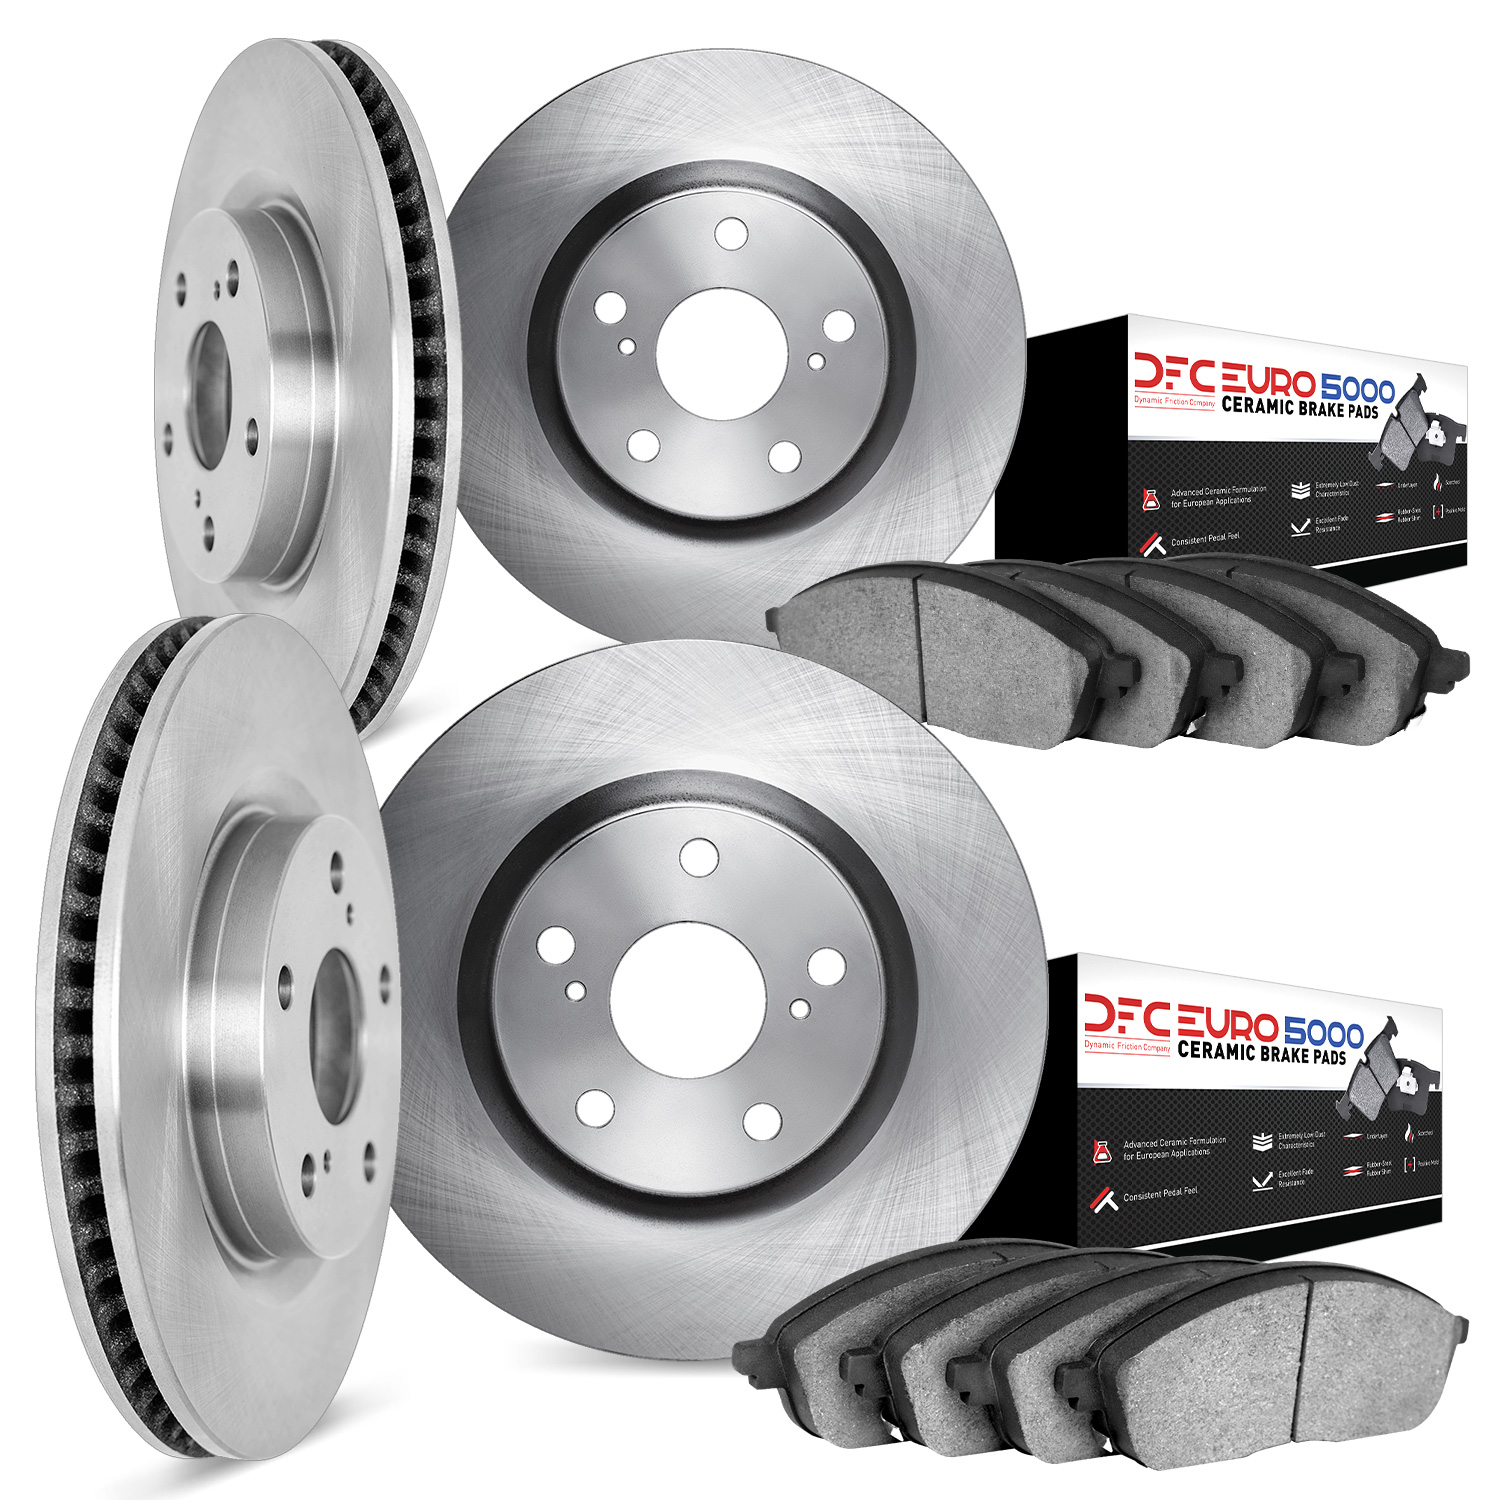 6604-11955 Brake Rotors w/5000 Euro Ceramic Brake Pads, 2005-2010 Ford/Lincoln/Mercury/Mazda, Position: Front and Rear